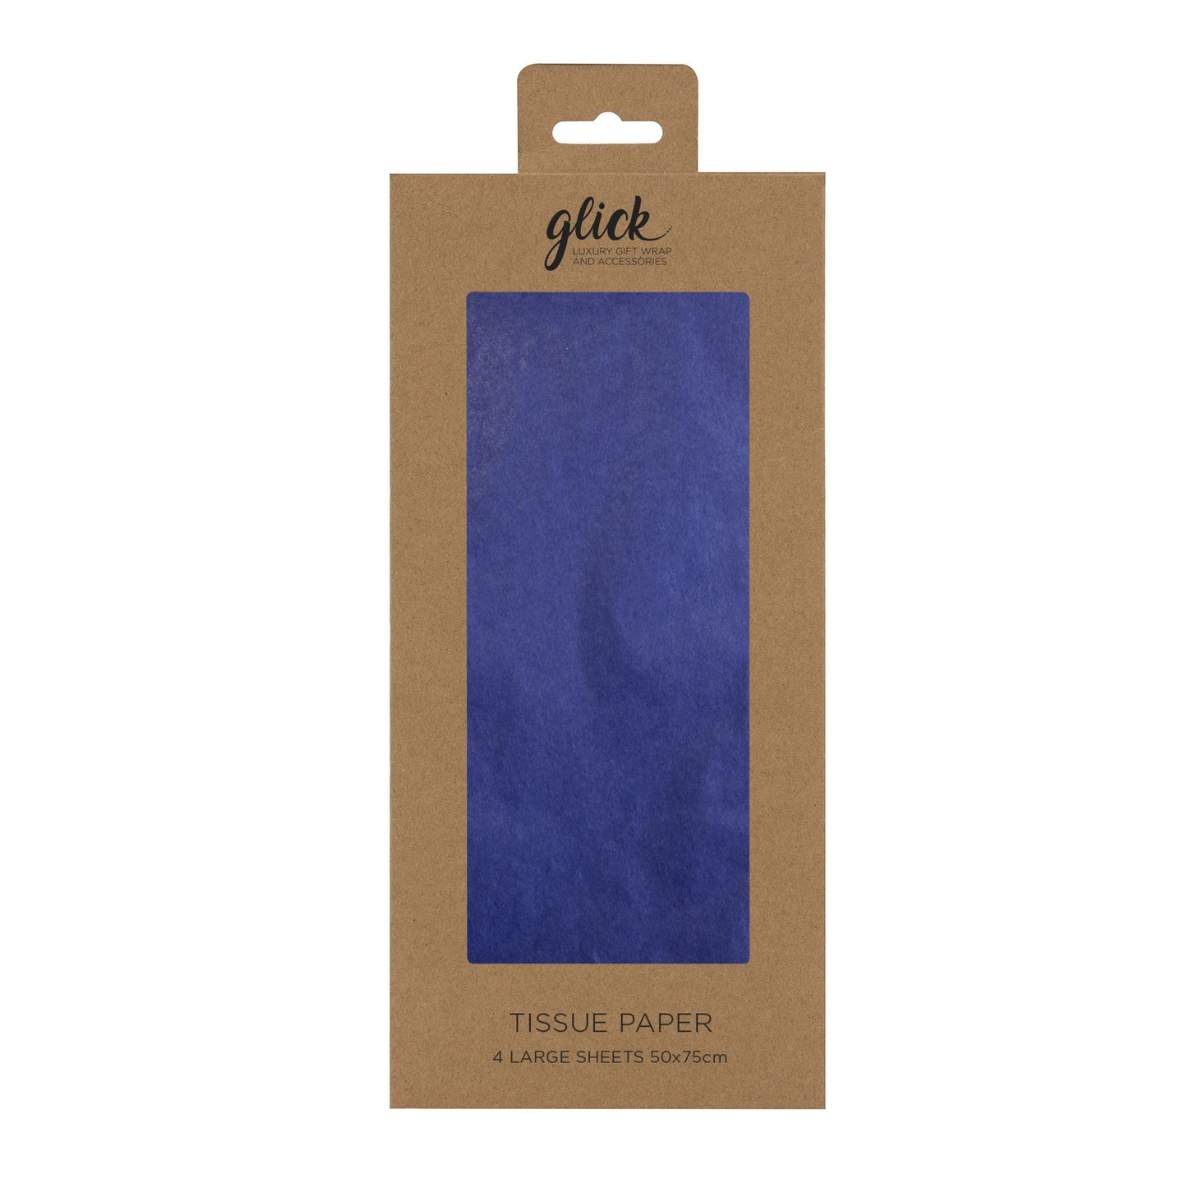 Image Showing A Packet Of Dark Blue Tissue Paper